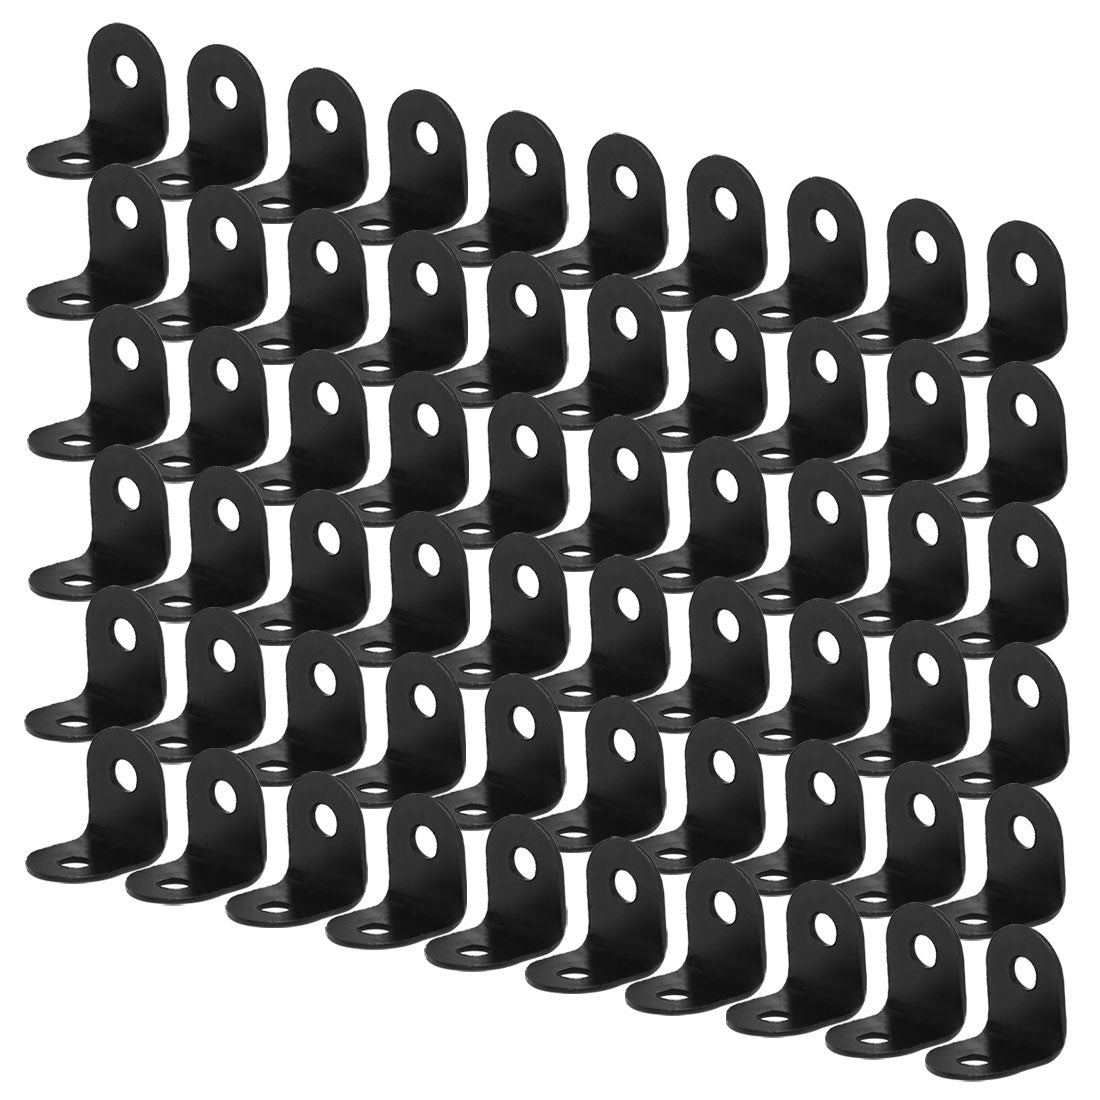 uxcell Uxcell 12 x 12mm Angle Bracket Metal Corner Brace Fastener Protector Support, 60pcs